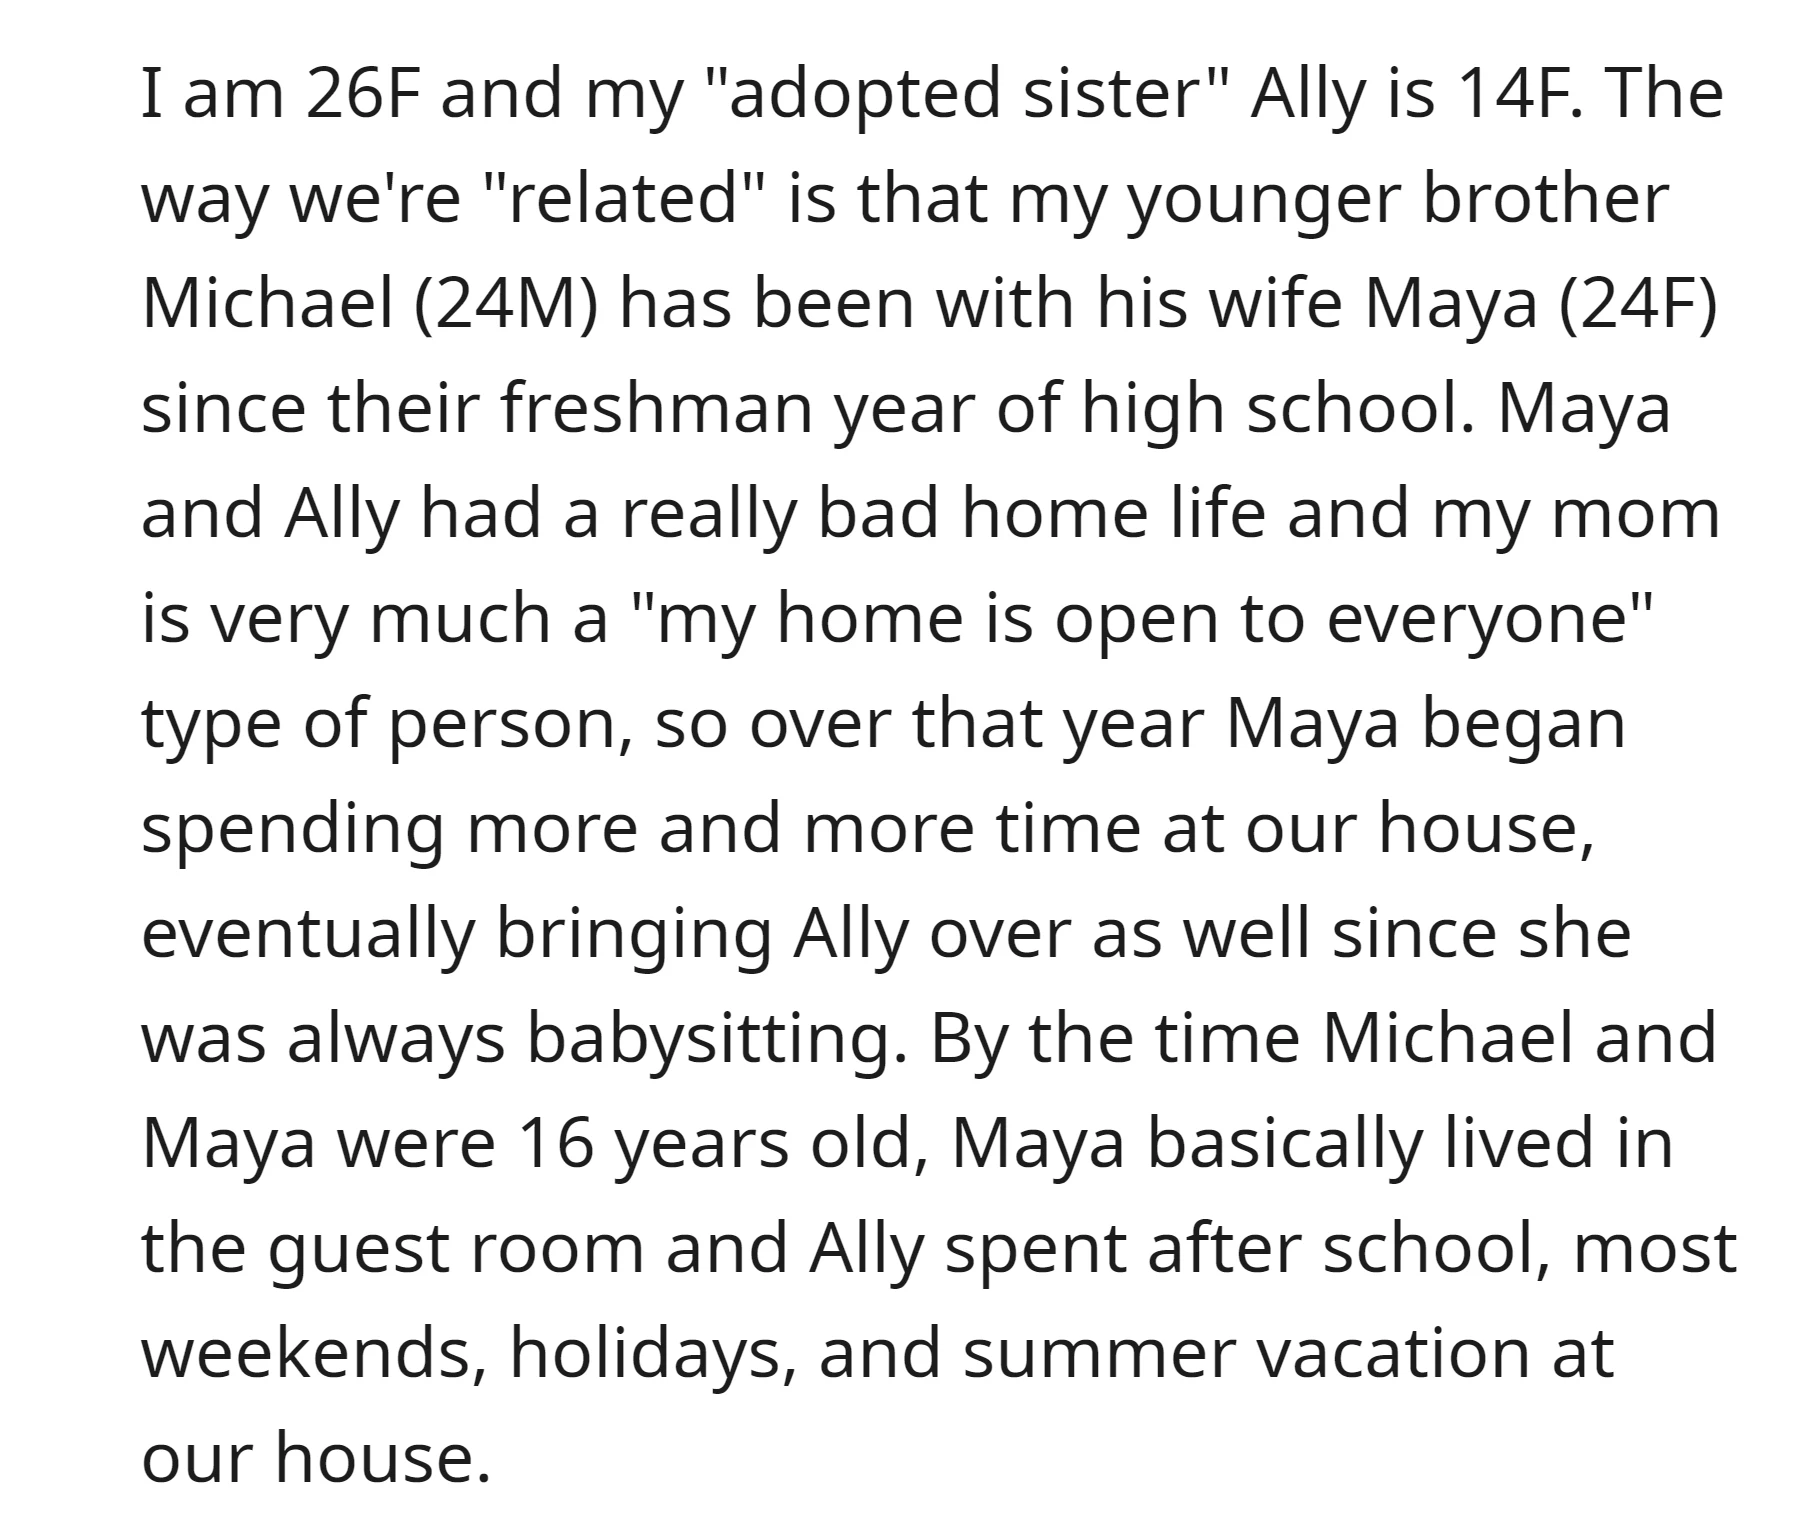 OP's adopted sister Ally often comes to babysitting